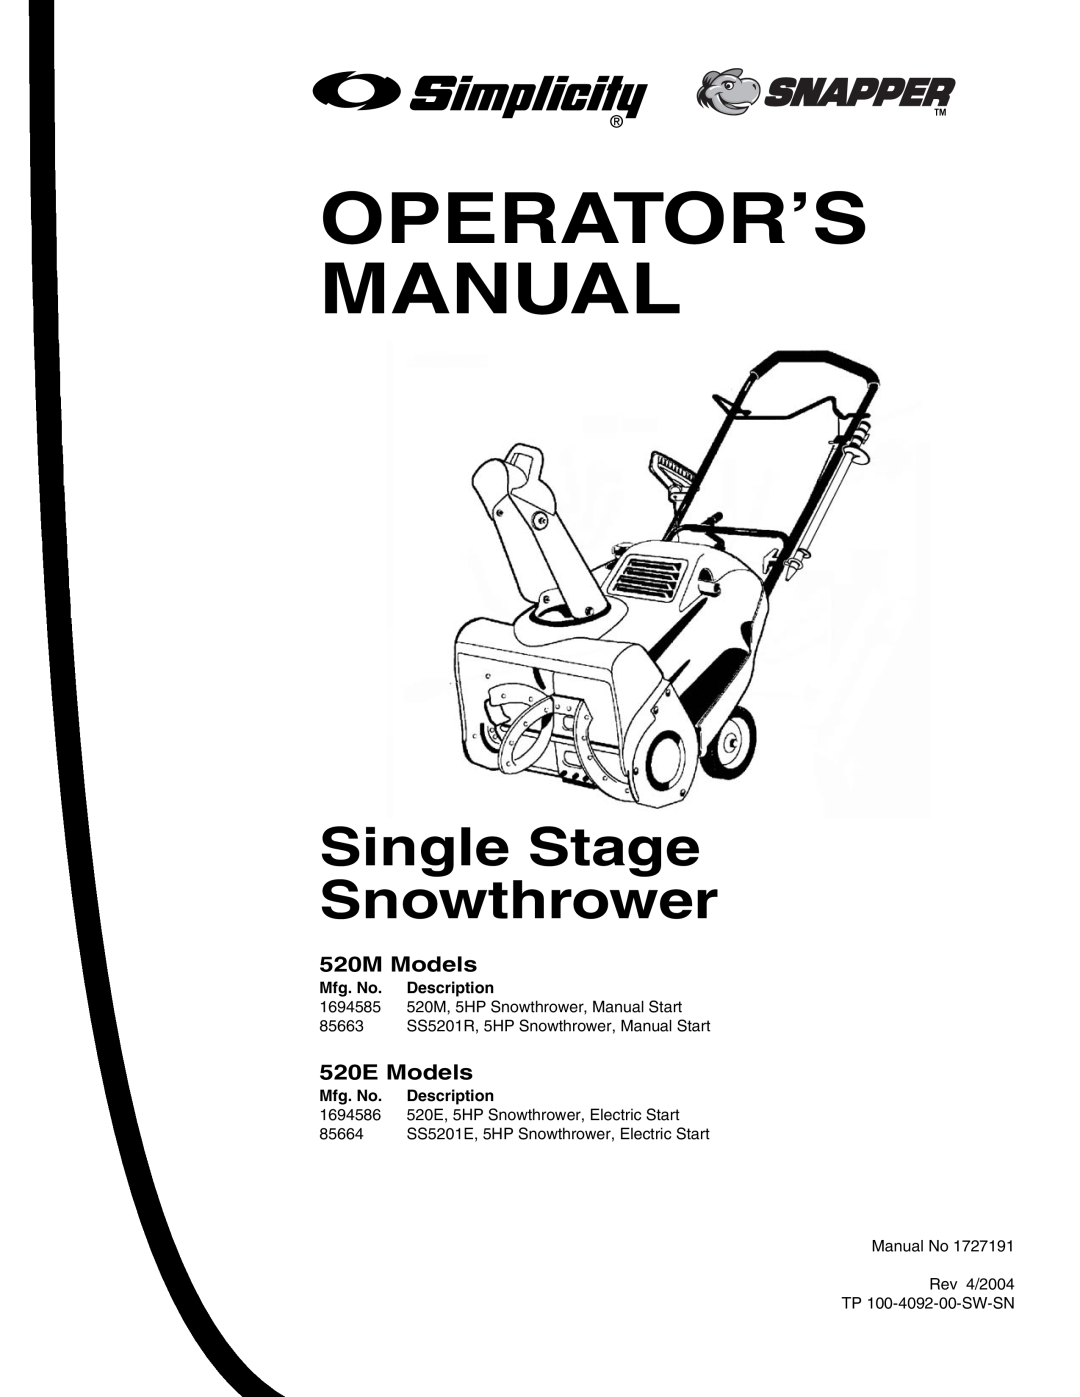 Snapper manual 520M Models, 520E Models, Operator’S Manual, Single Stage Snowthrower 